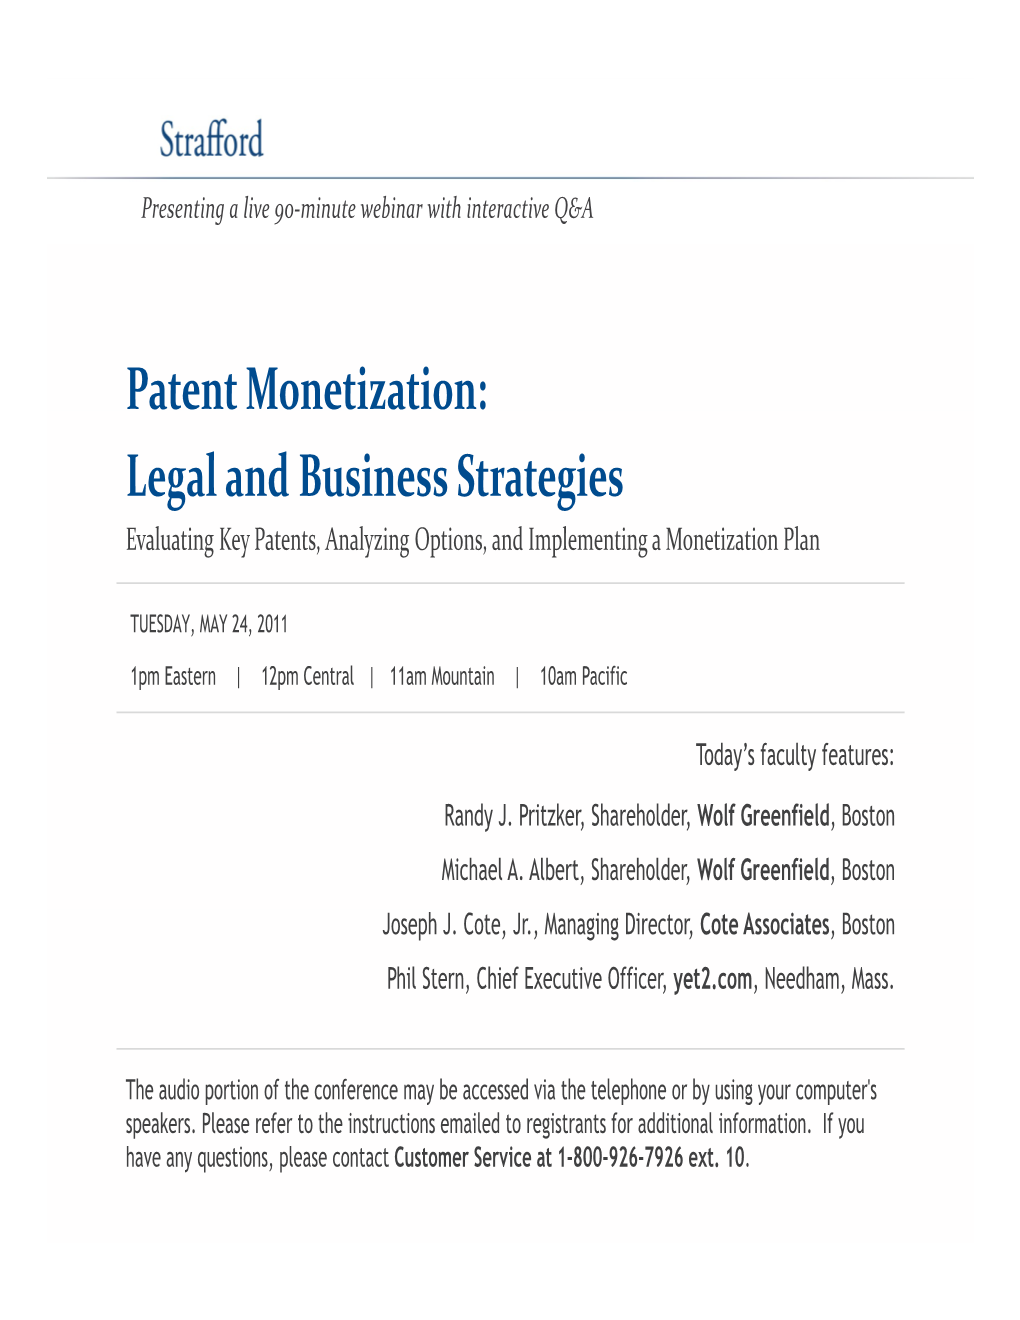 Patent Monetization: Legal and Business Strategies Evaluating Key Patents, Analyzing Options, and Implementing a Monetization Plan